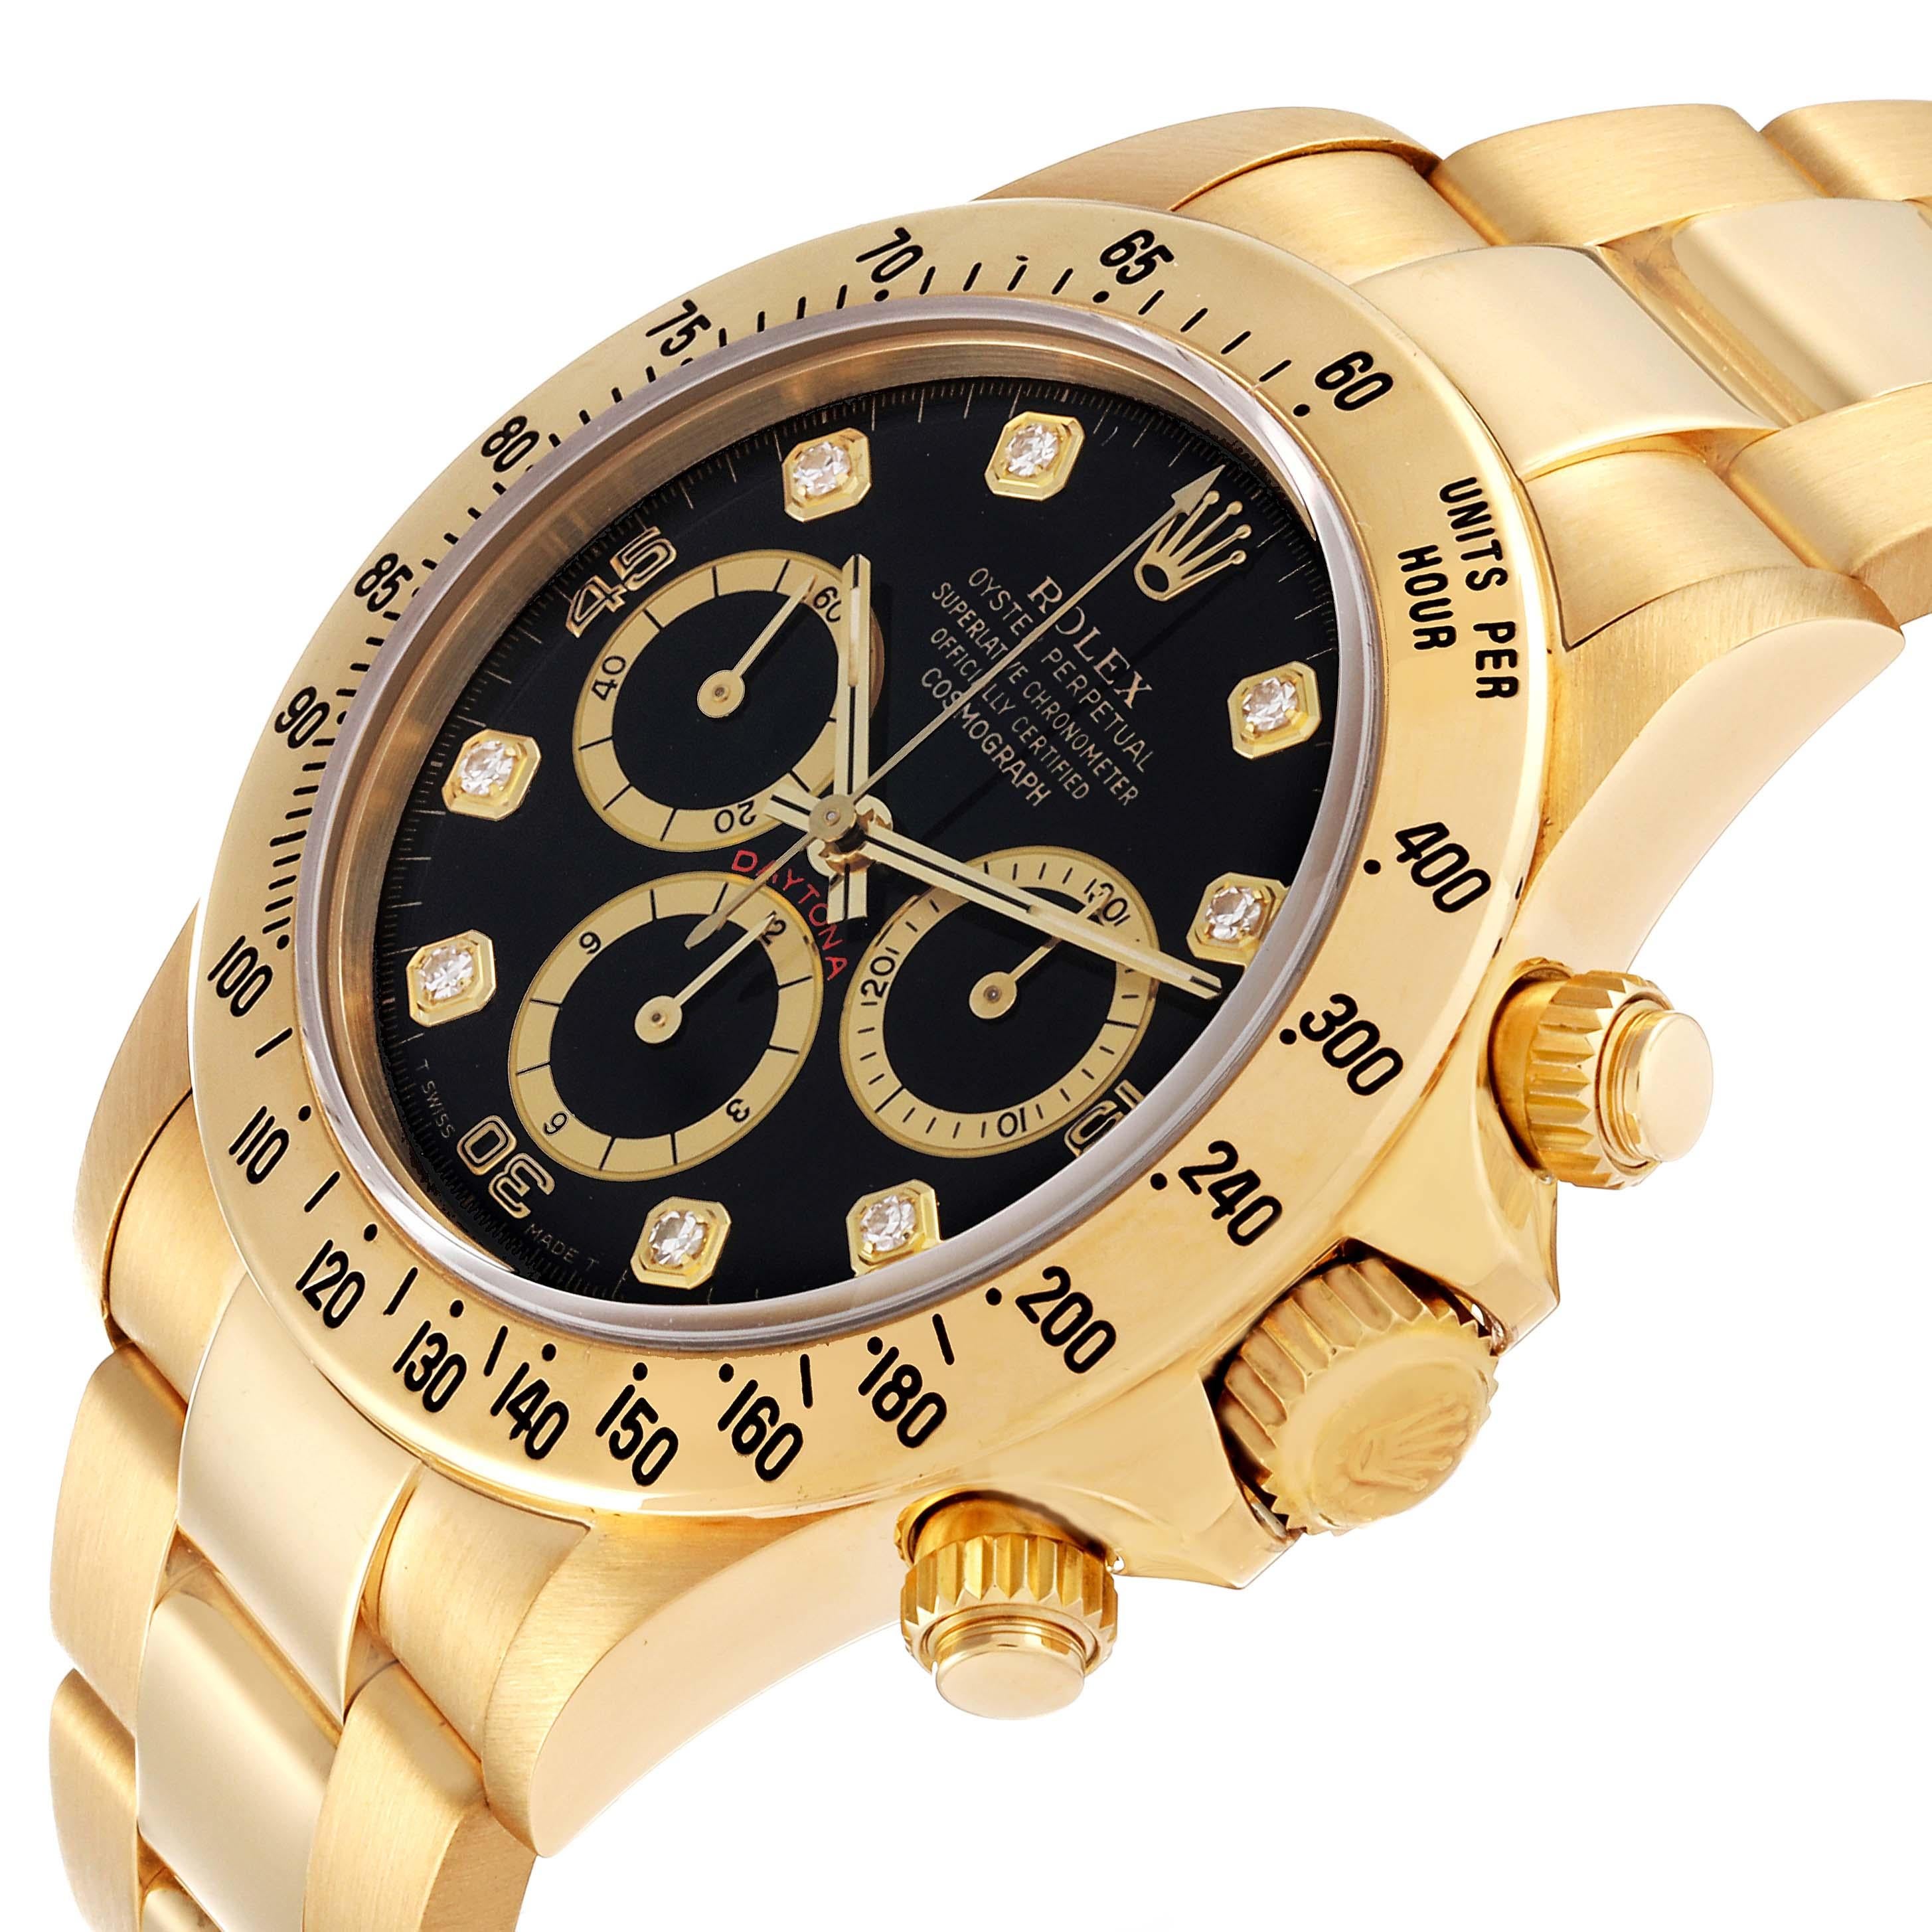 Rolex Daytona Yellow Gold Inverted 6 Diamond Dial Mens Watch 16528. Officially certified chronometer automatic self-winding movement. 18K yellow gold case 40.0 mm in diameter. Special screw-down push buttons. Triplock winding crown protected by the